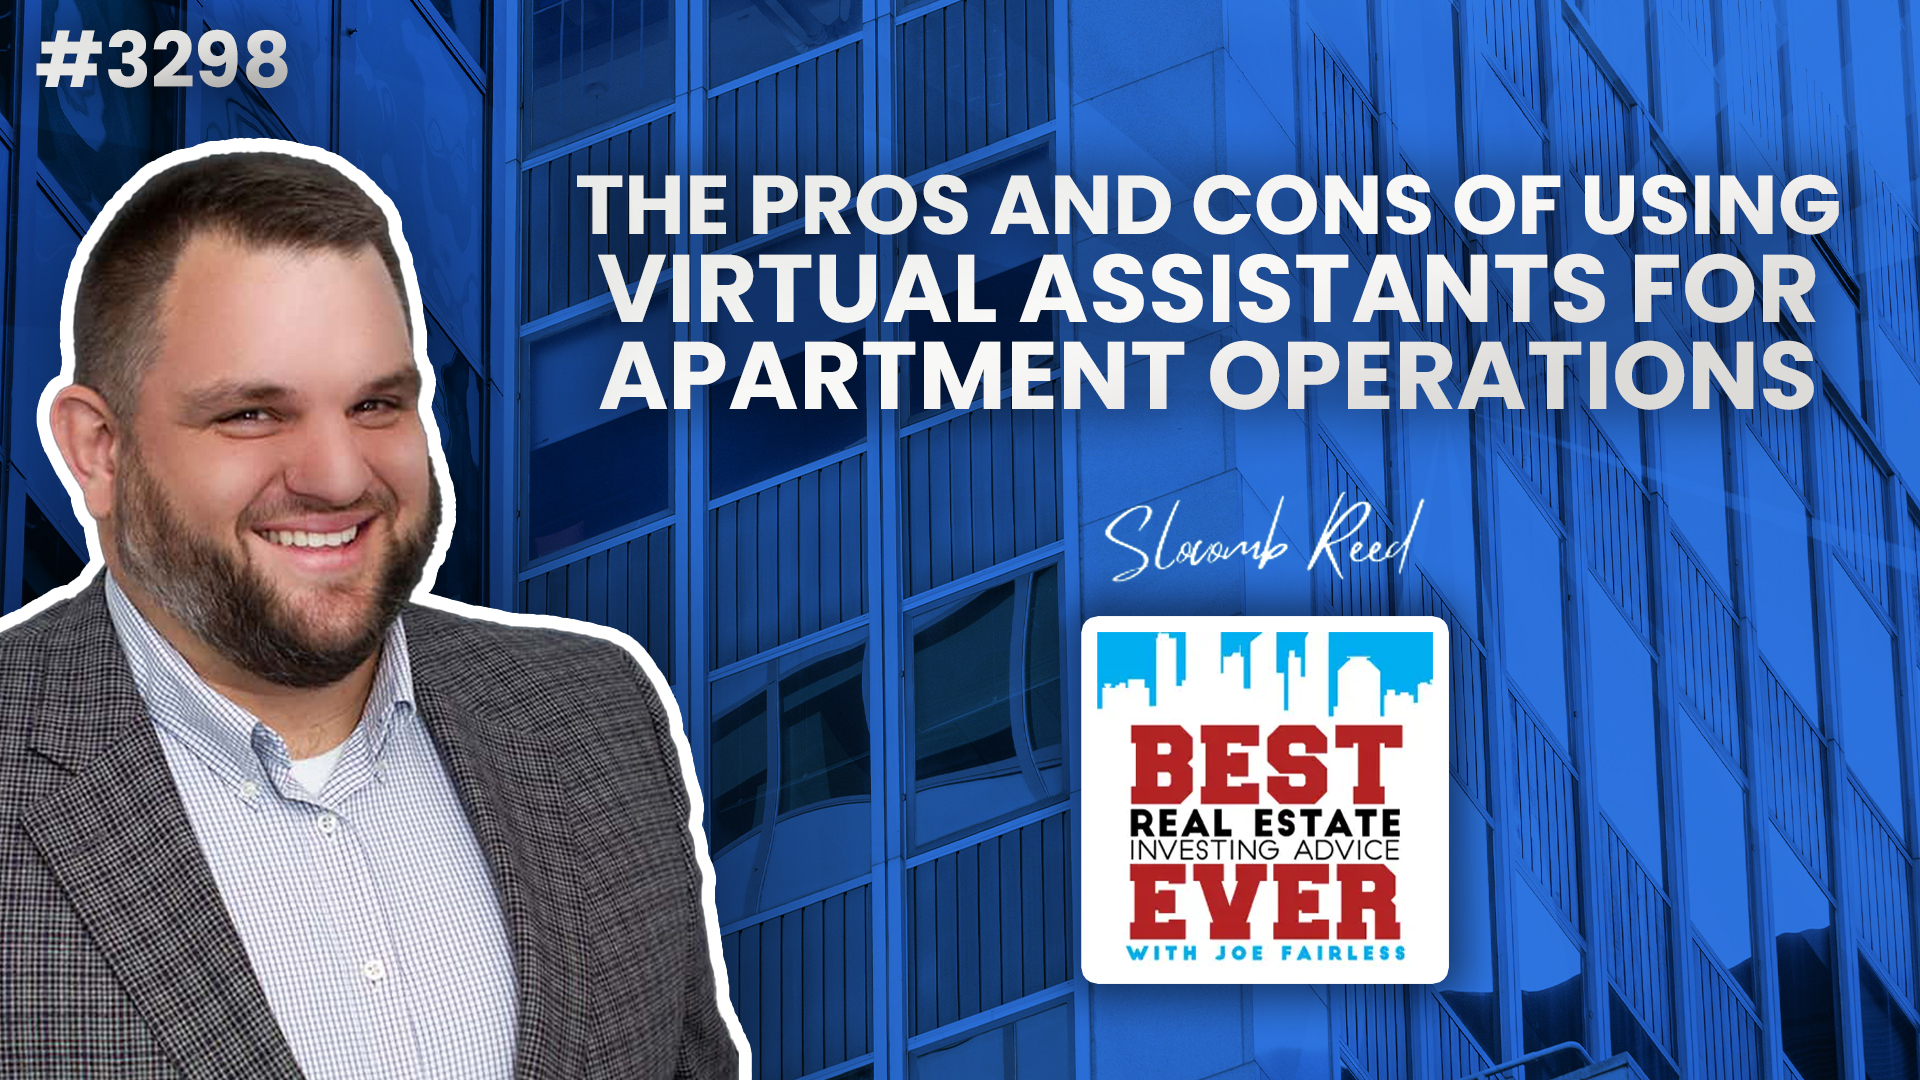 The Pros and Cons of Using Virtual Assistants for Apartment Operations